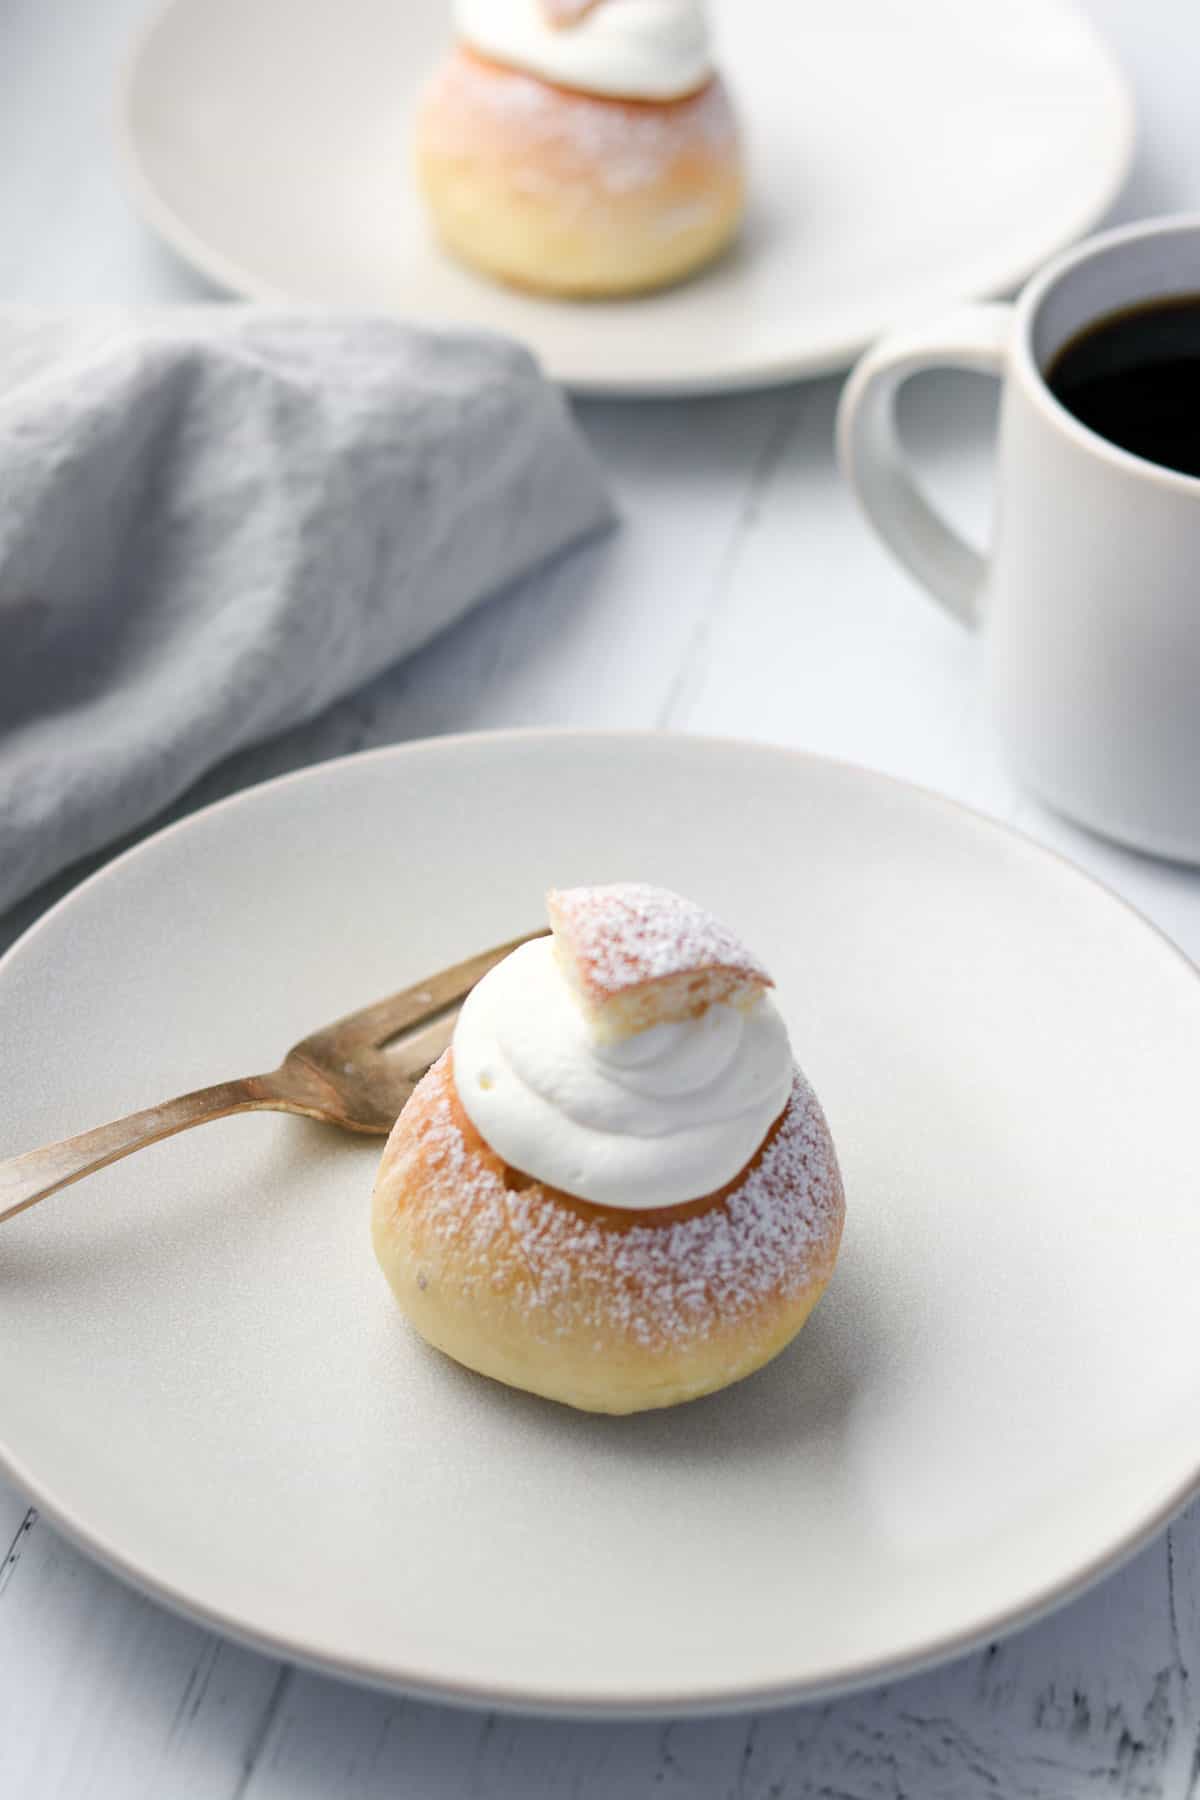 Semlor bun a on a plate next to a fork, napkin and cup of coffee.